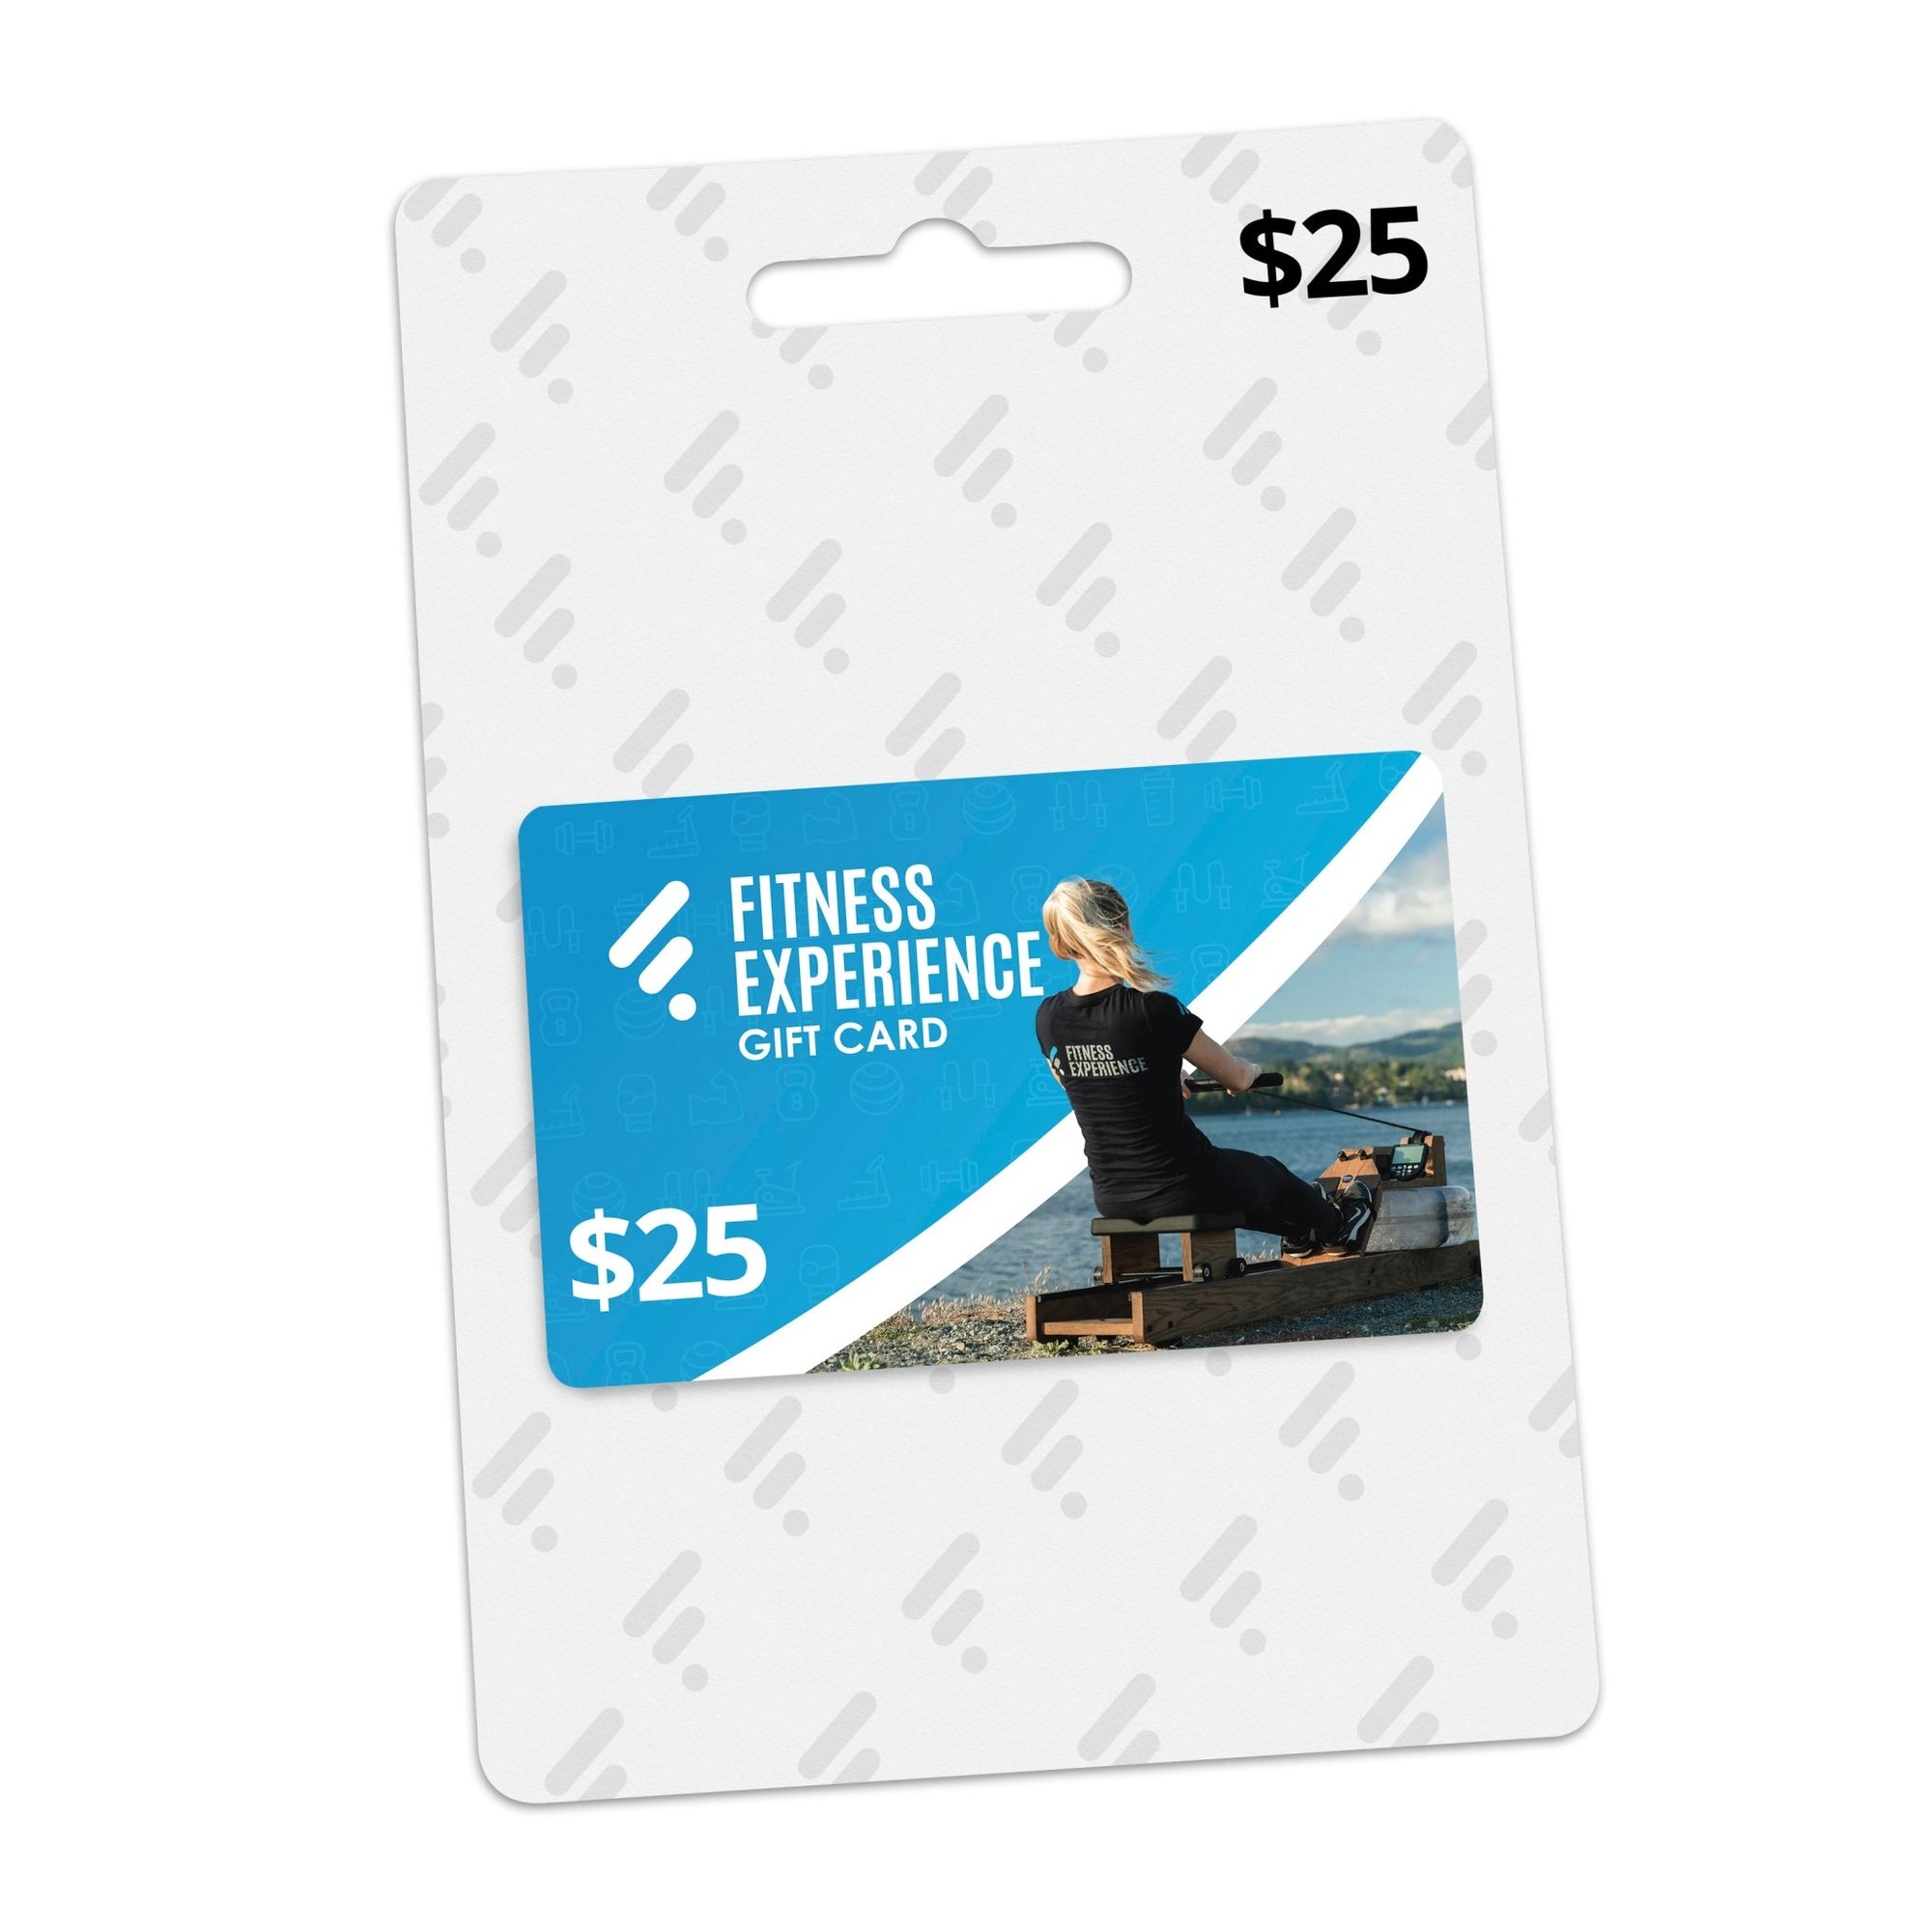 Prezzee case study: Reinventing the gift card experience | Pollen Digital